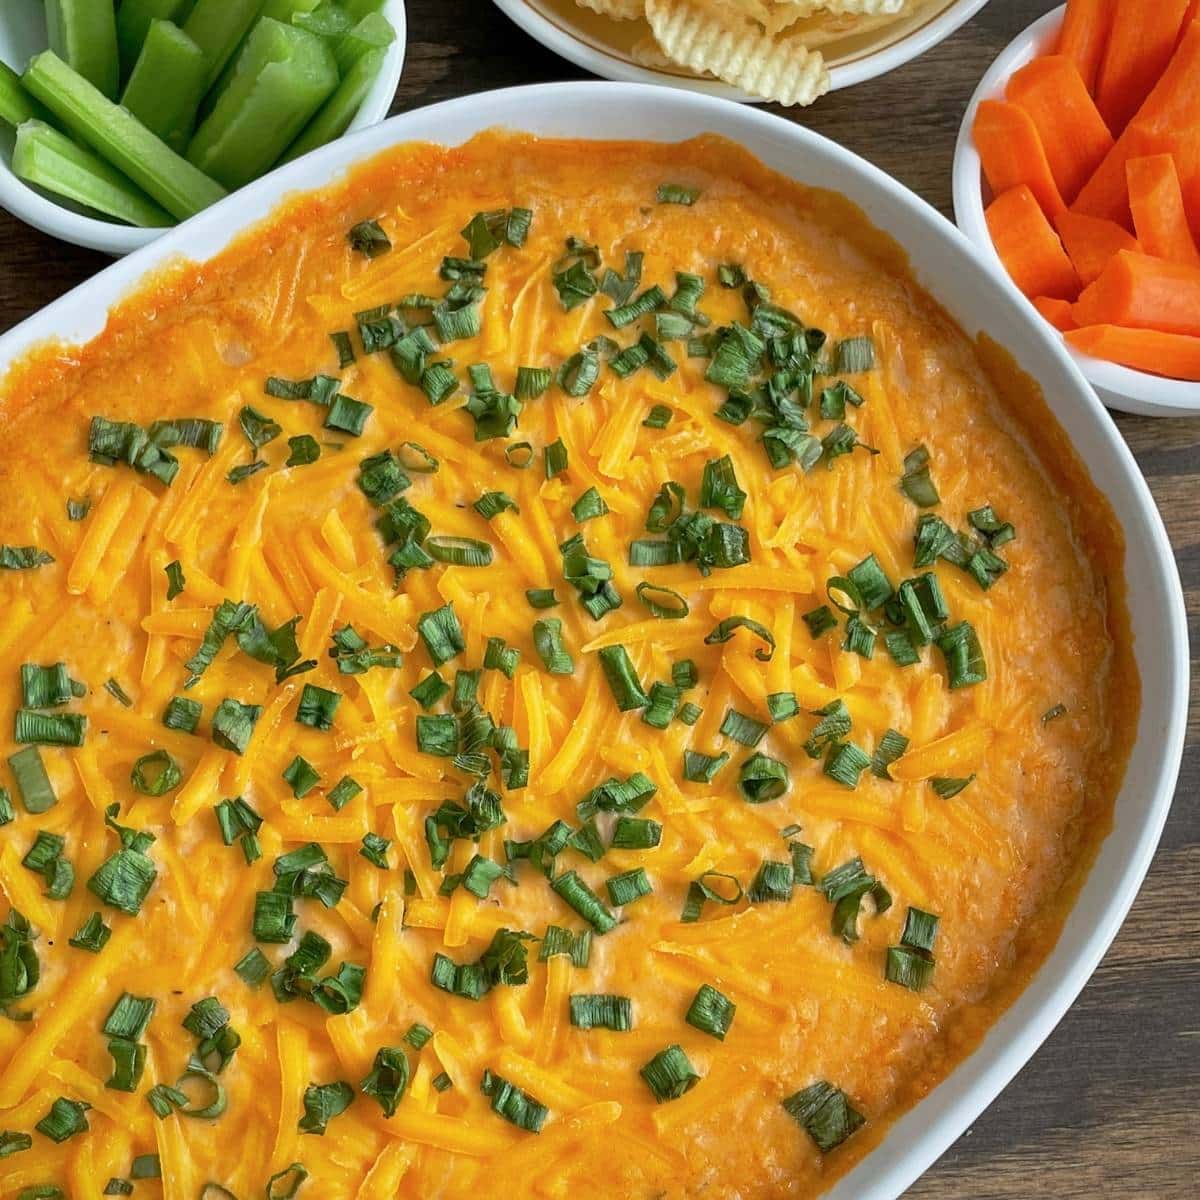 Vegan baked Buffalo dip with green onions as garnish on top.